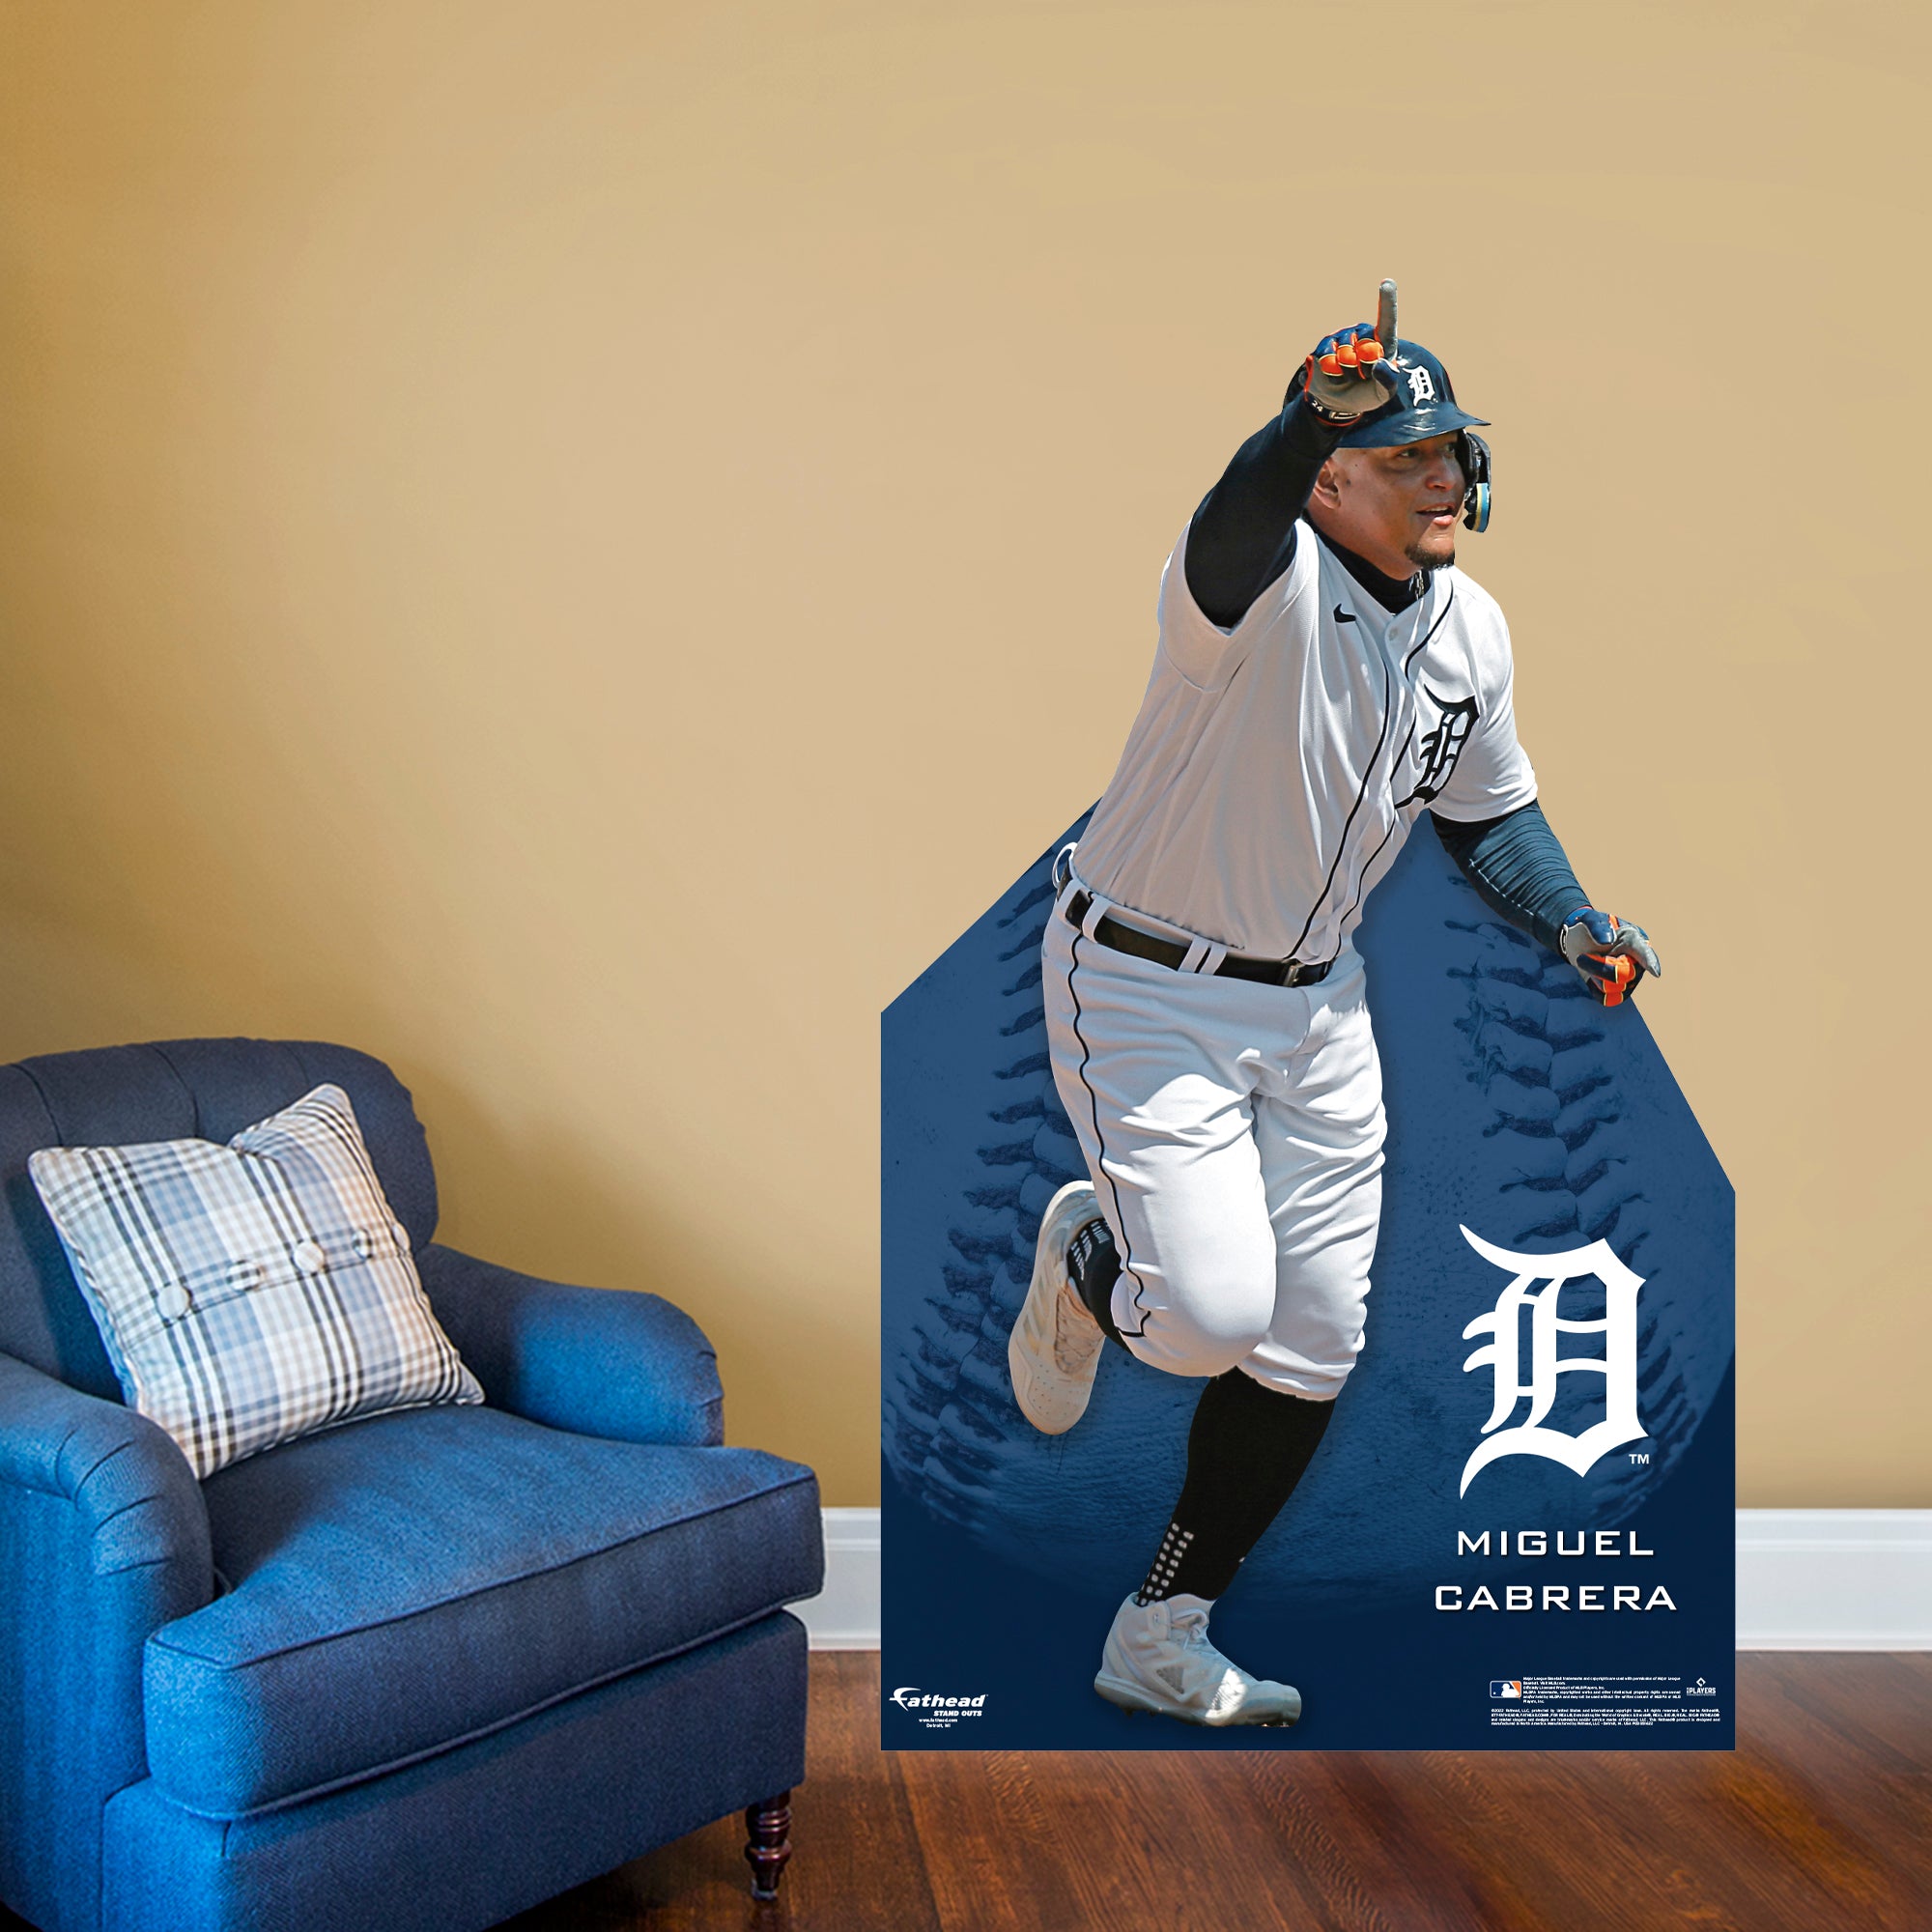 Detroit Tigers: Miguel Cabrera 2022 Poster - Officially Licensed MLB R –  Fathead